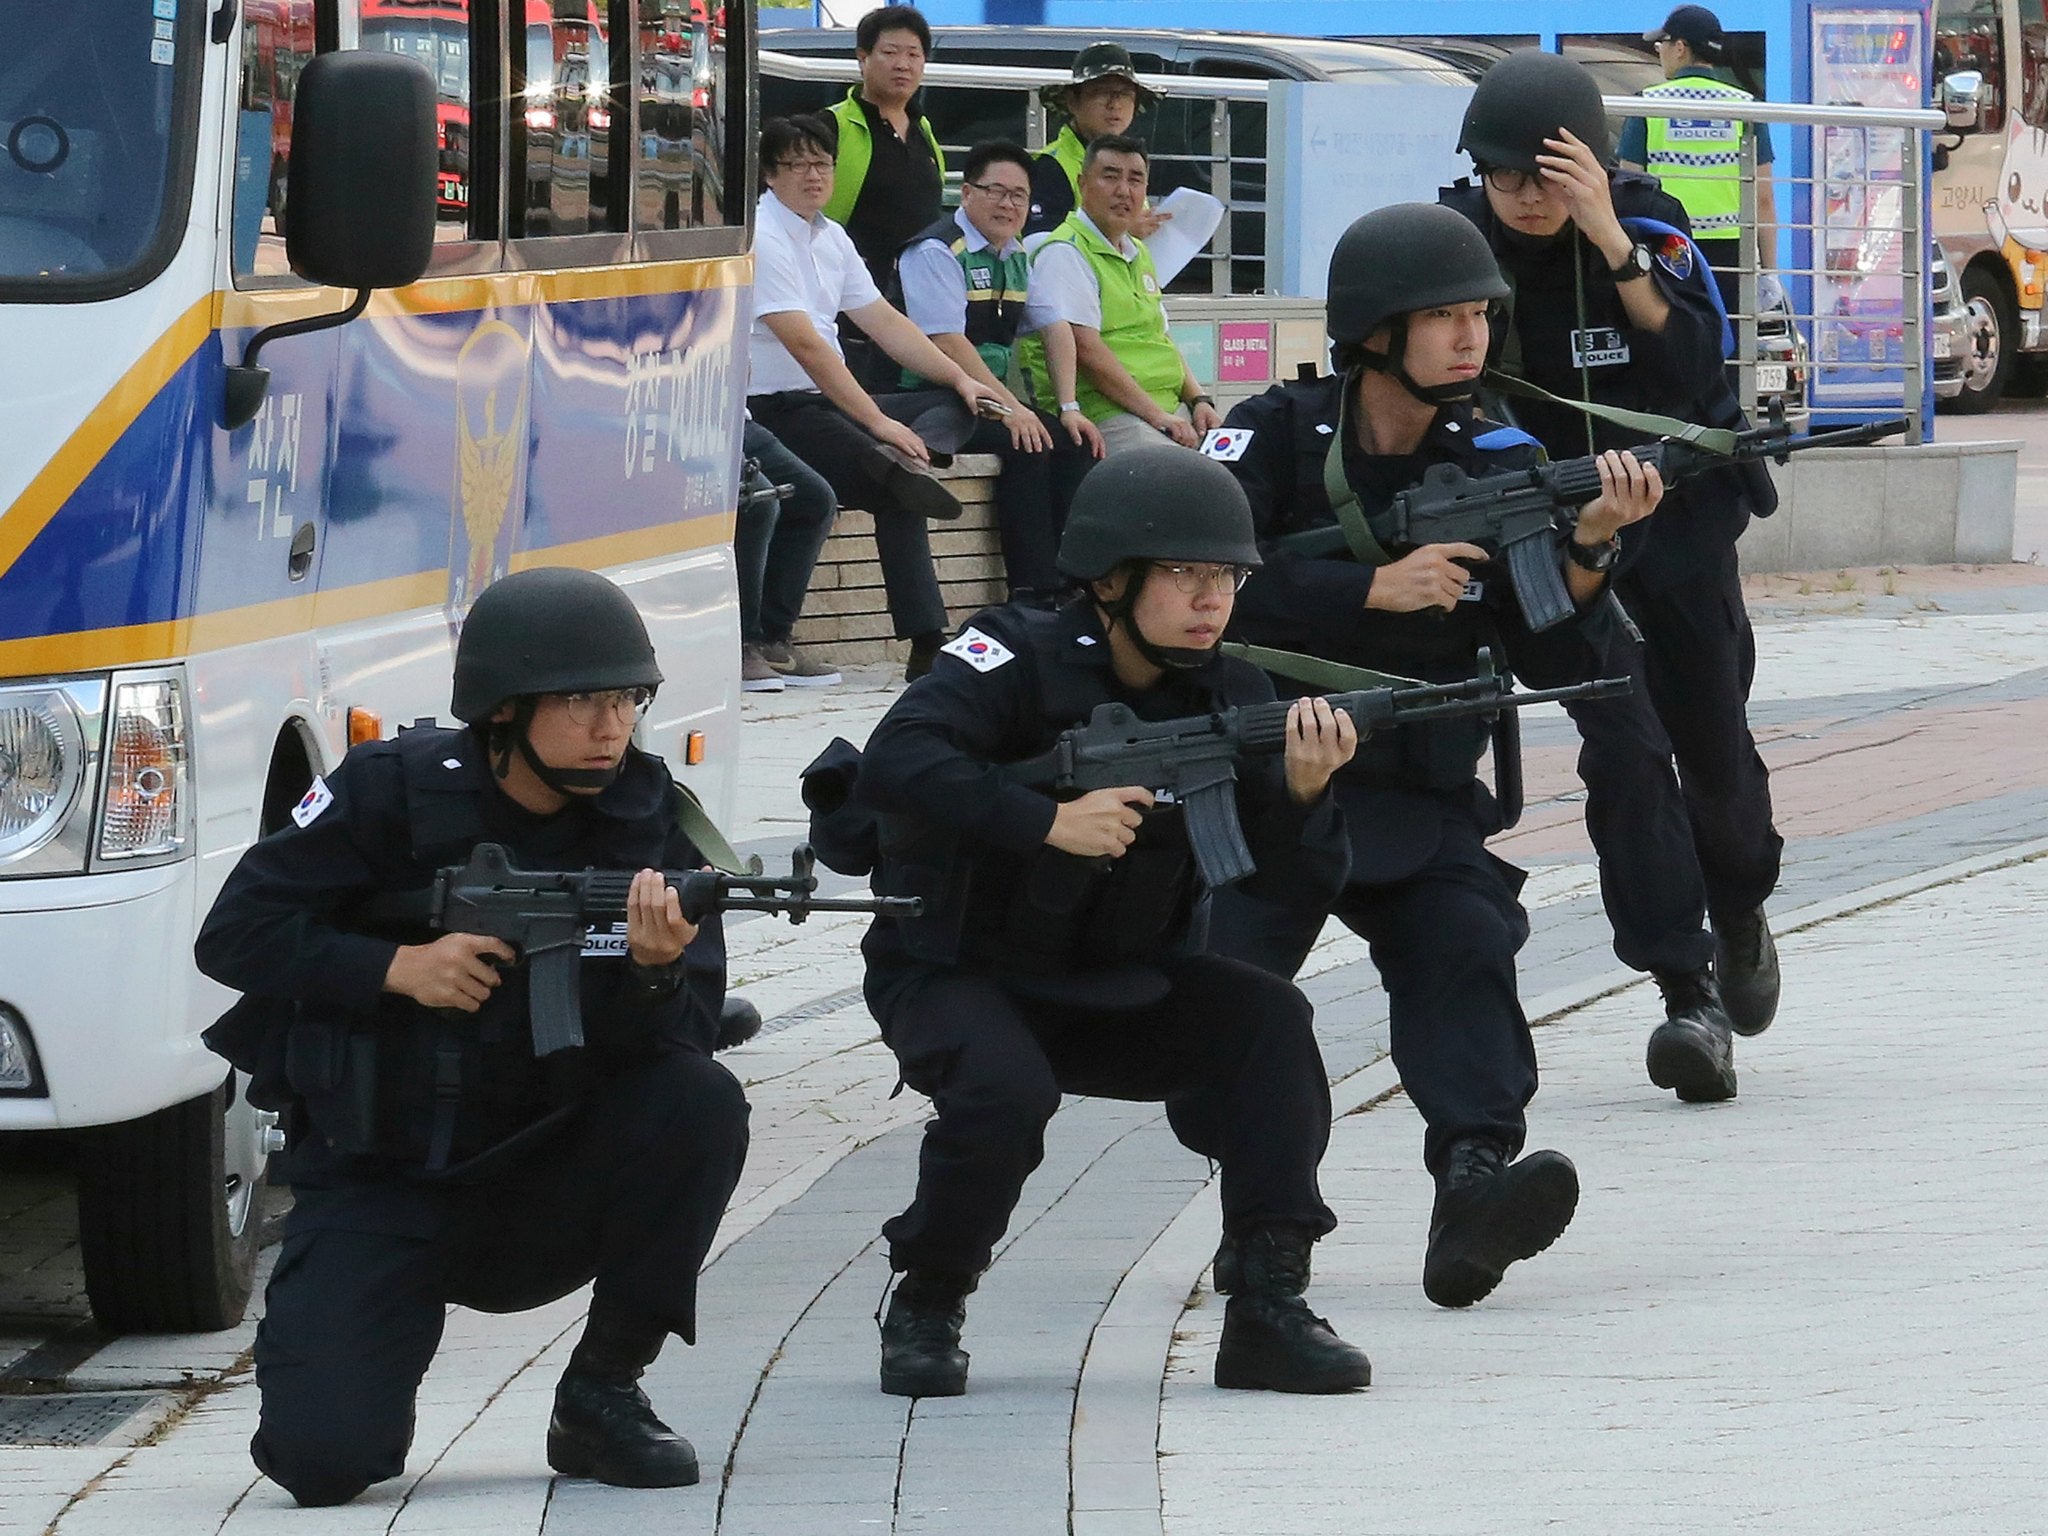 South Korean police officers participate in the Ulchi Freedom Guardian exercise, in Goyang, South Korea on Aug. 21, 2017.